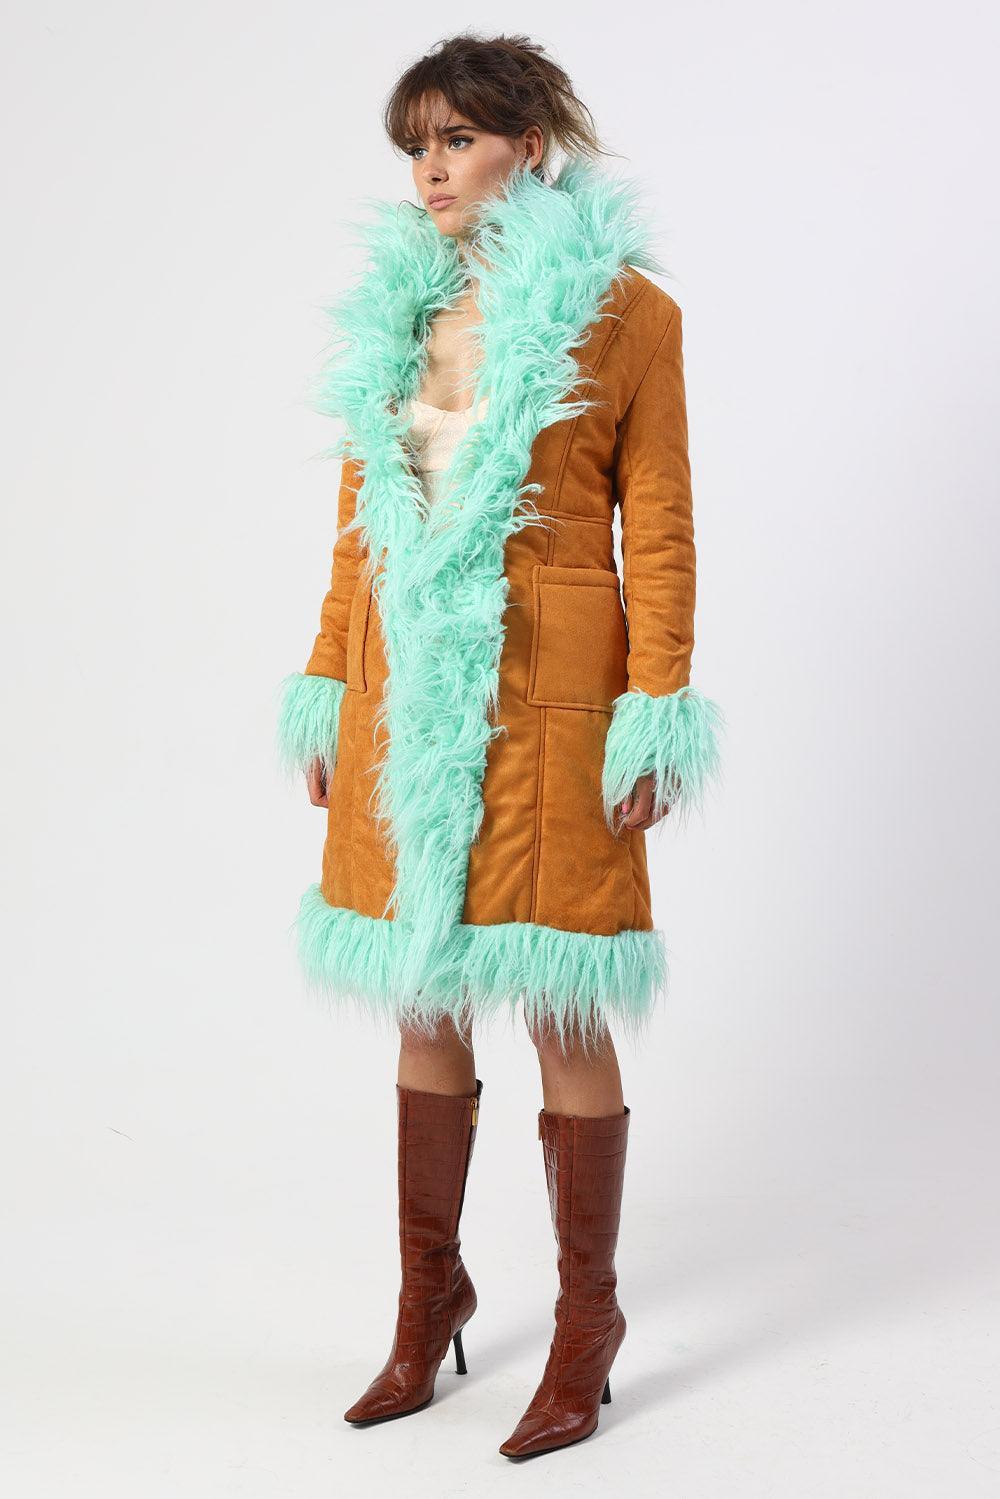 3/4 Length faux suede coat in a rich tan brown with a mint green shaggy faux fur trim and wide shawl collar